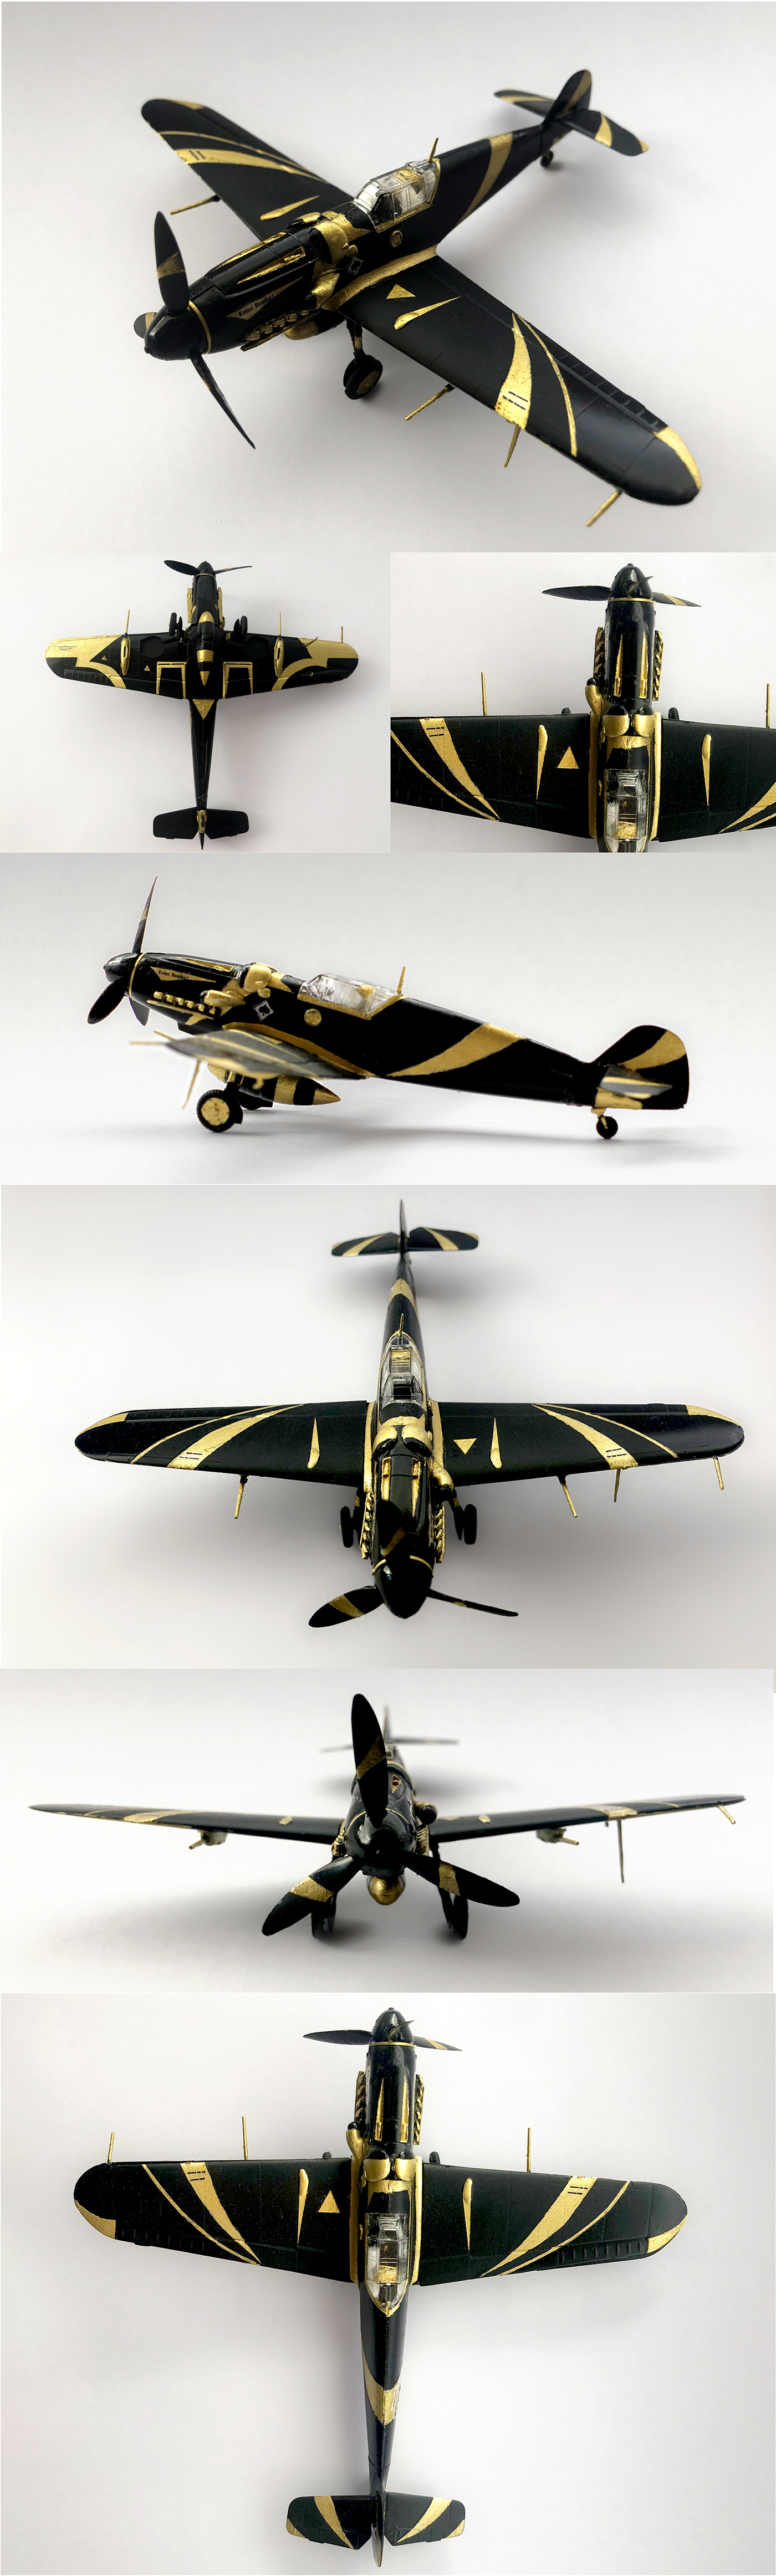 scale models World war 2 WWII ww2 Need For Speed airplanes Racing Car Custom Paint Jobs Mustang stuka Spitfire